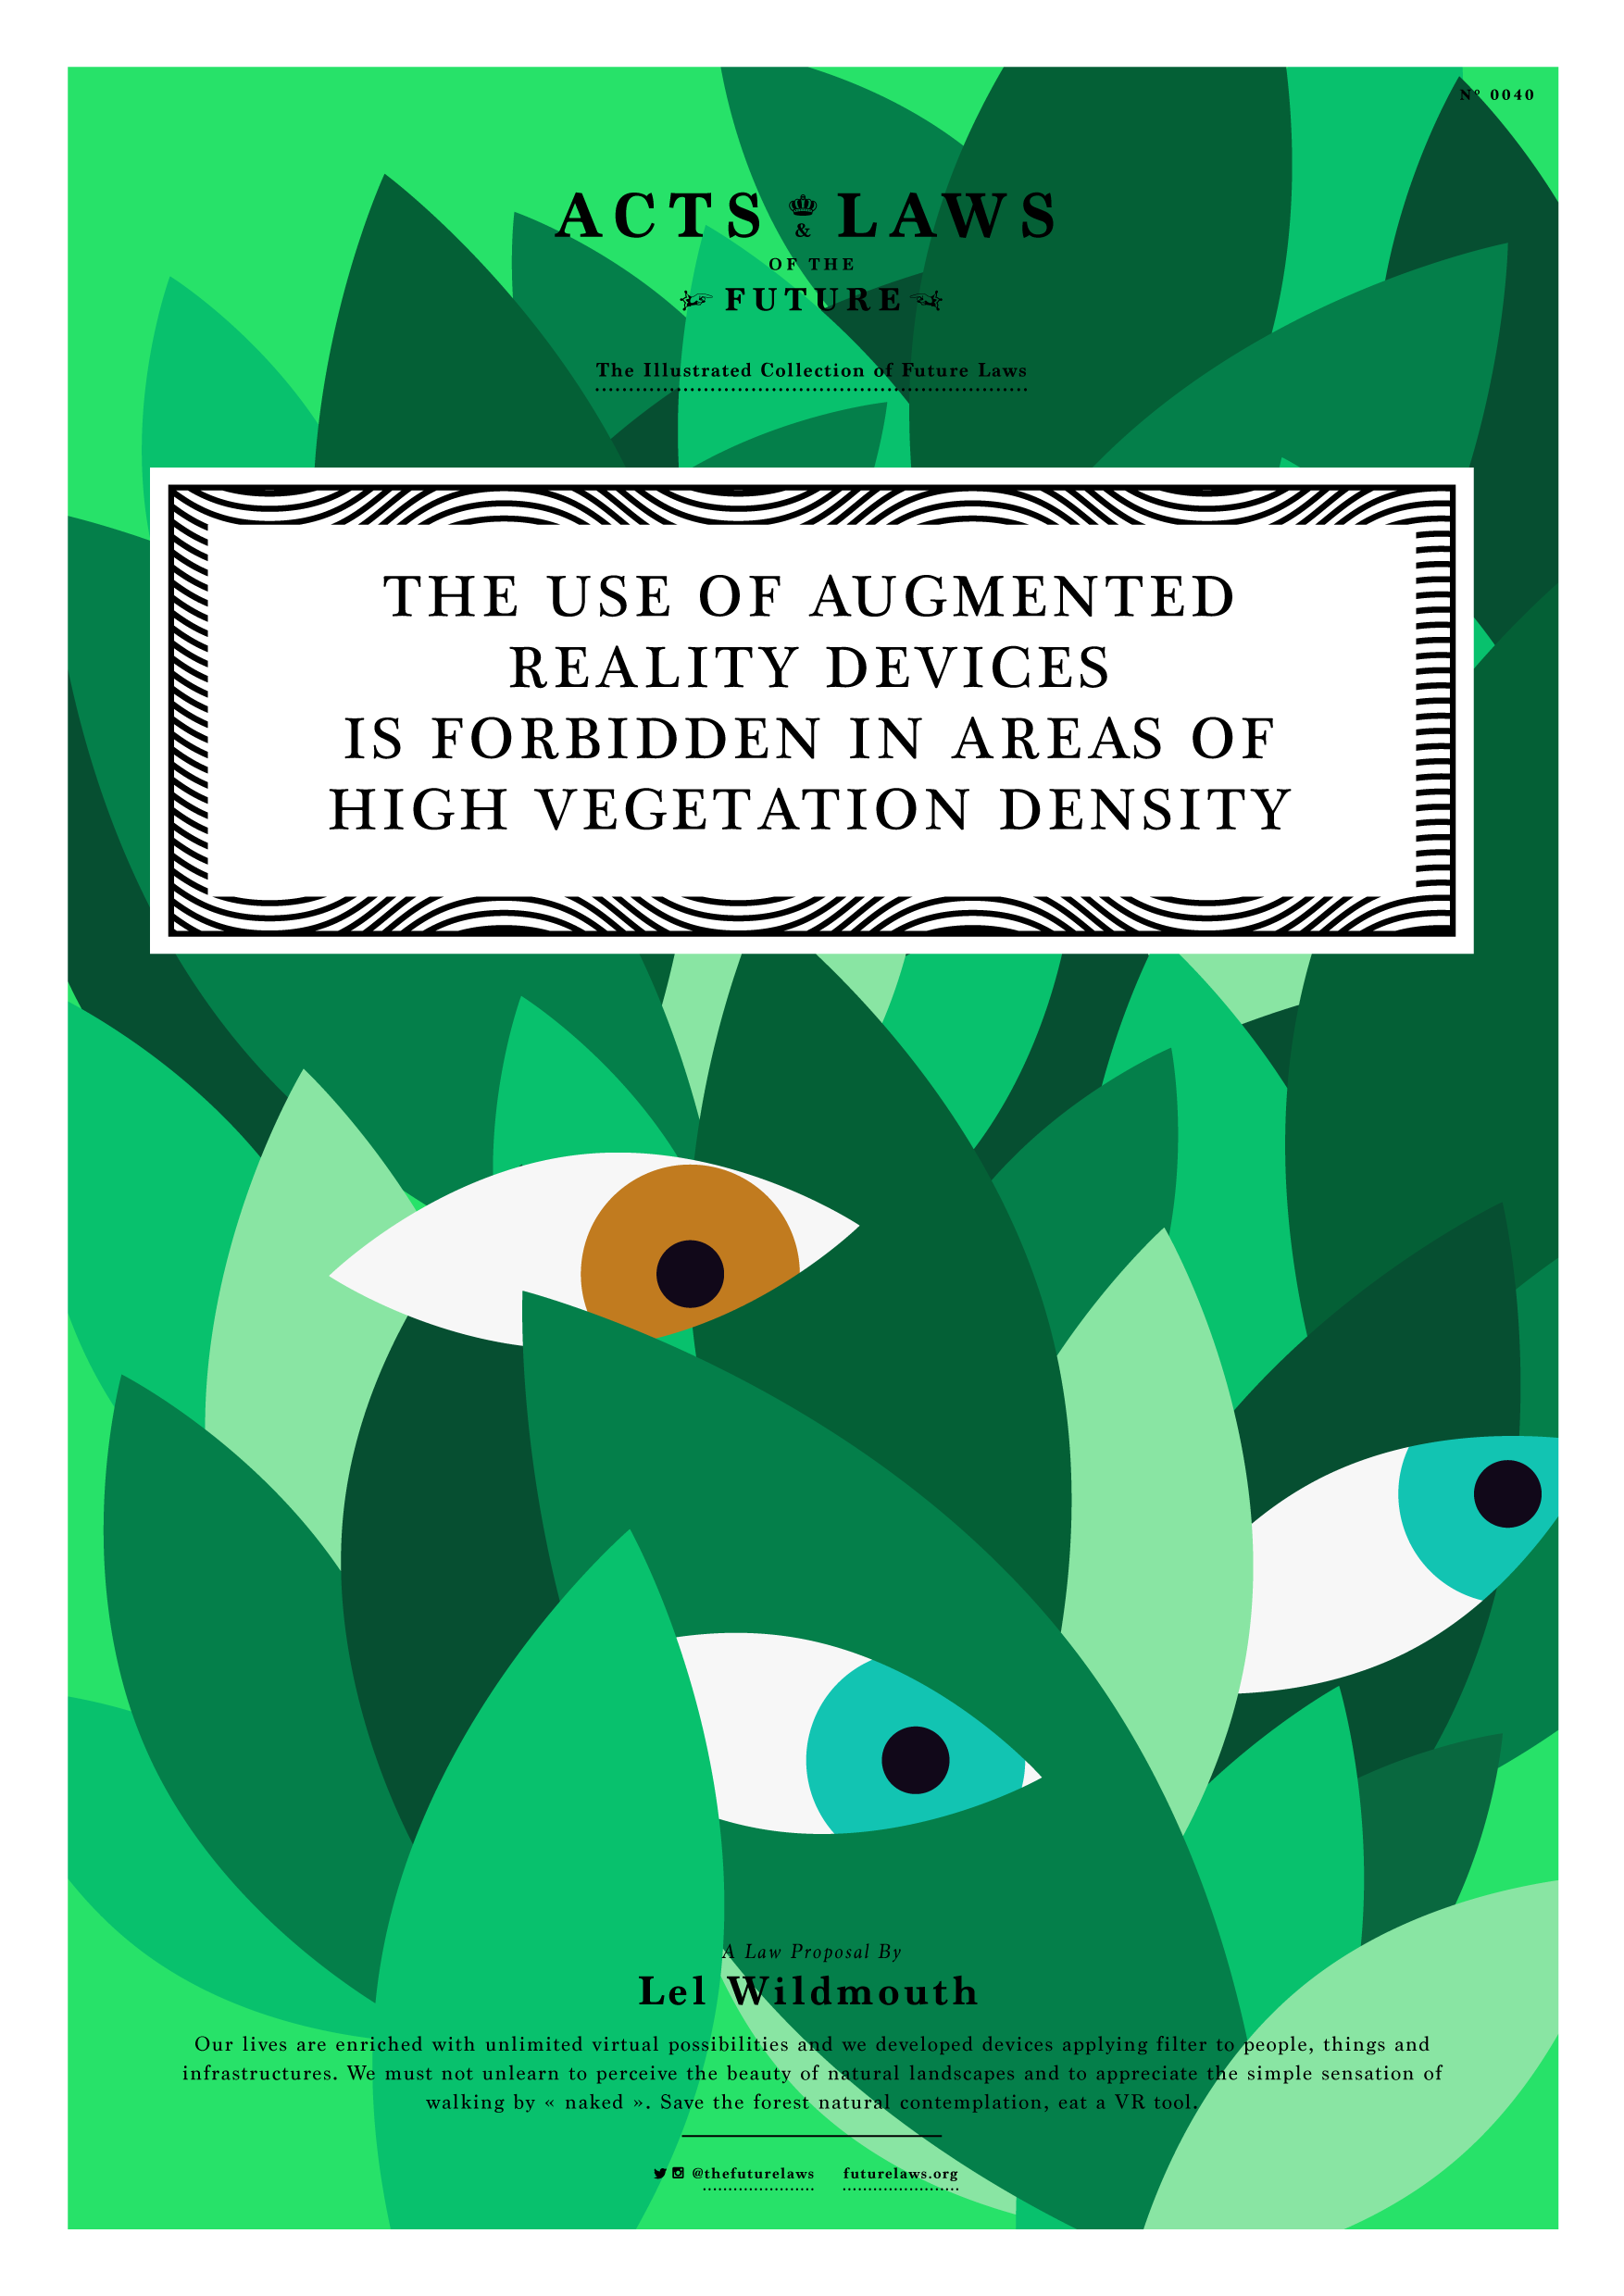 THE USE OF AUGMENTED REALITY DEVICES IS FORBIDDEN IN AREAS OF HIGH VEGETATION DENSITY